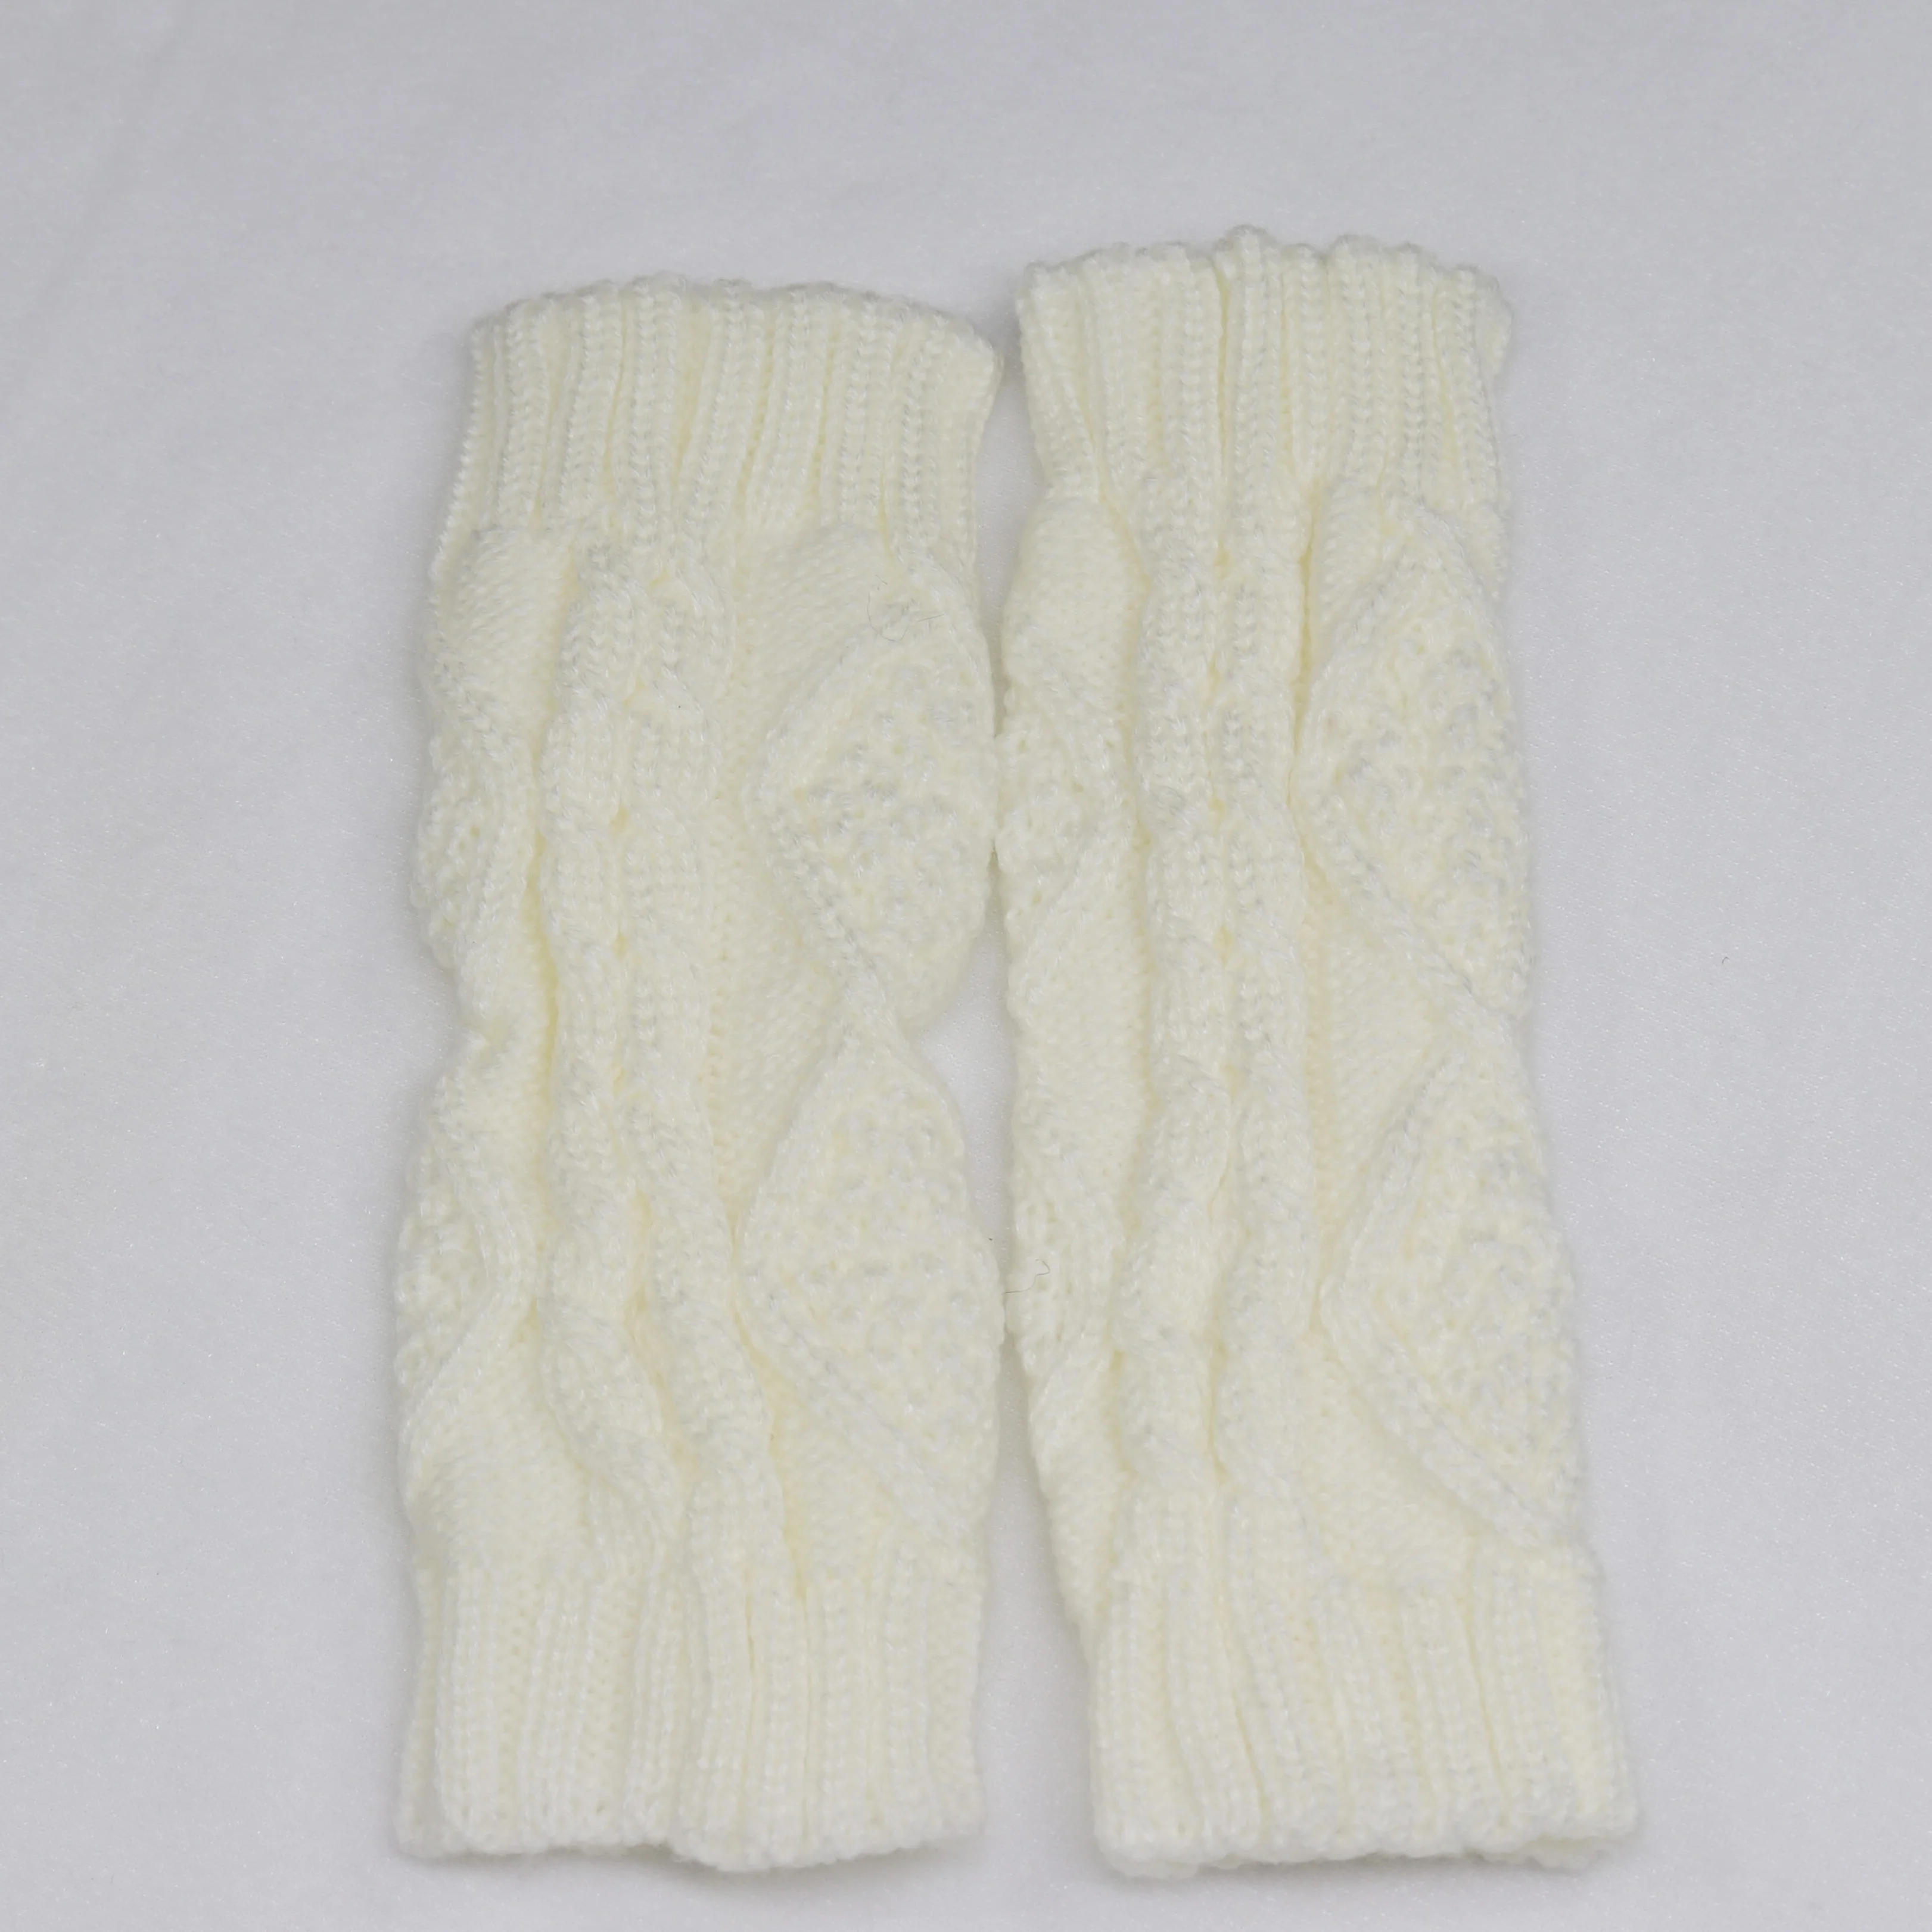 Women's Half Finger Gloves Diamond Rhombus Warm Gloves in autumn and winter Thickened knitted gloves